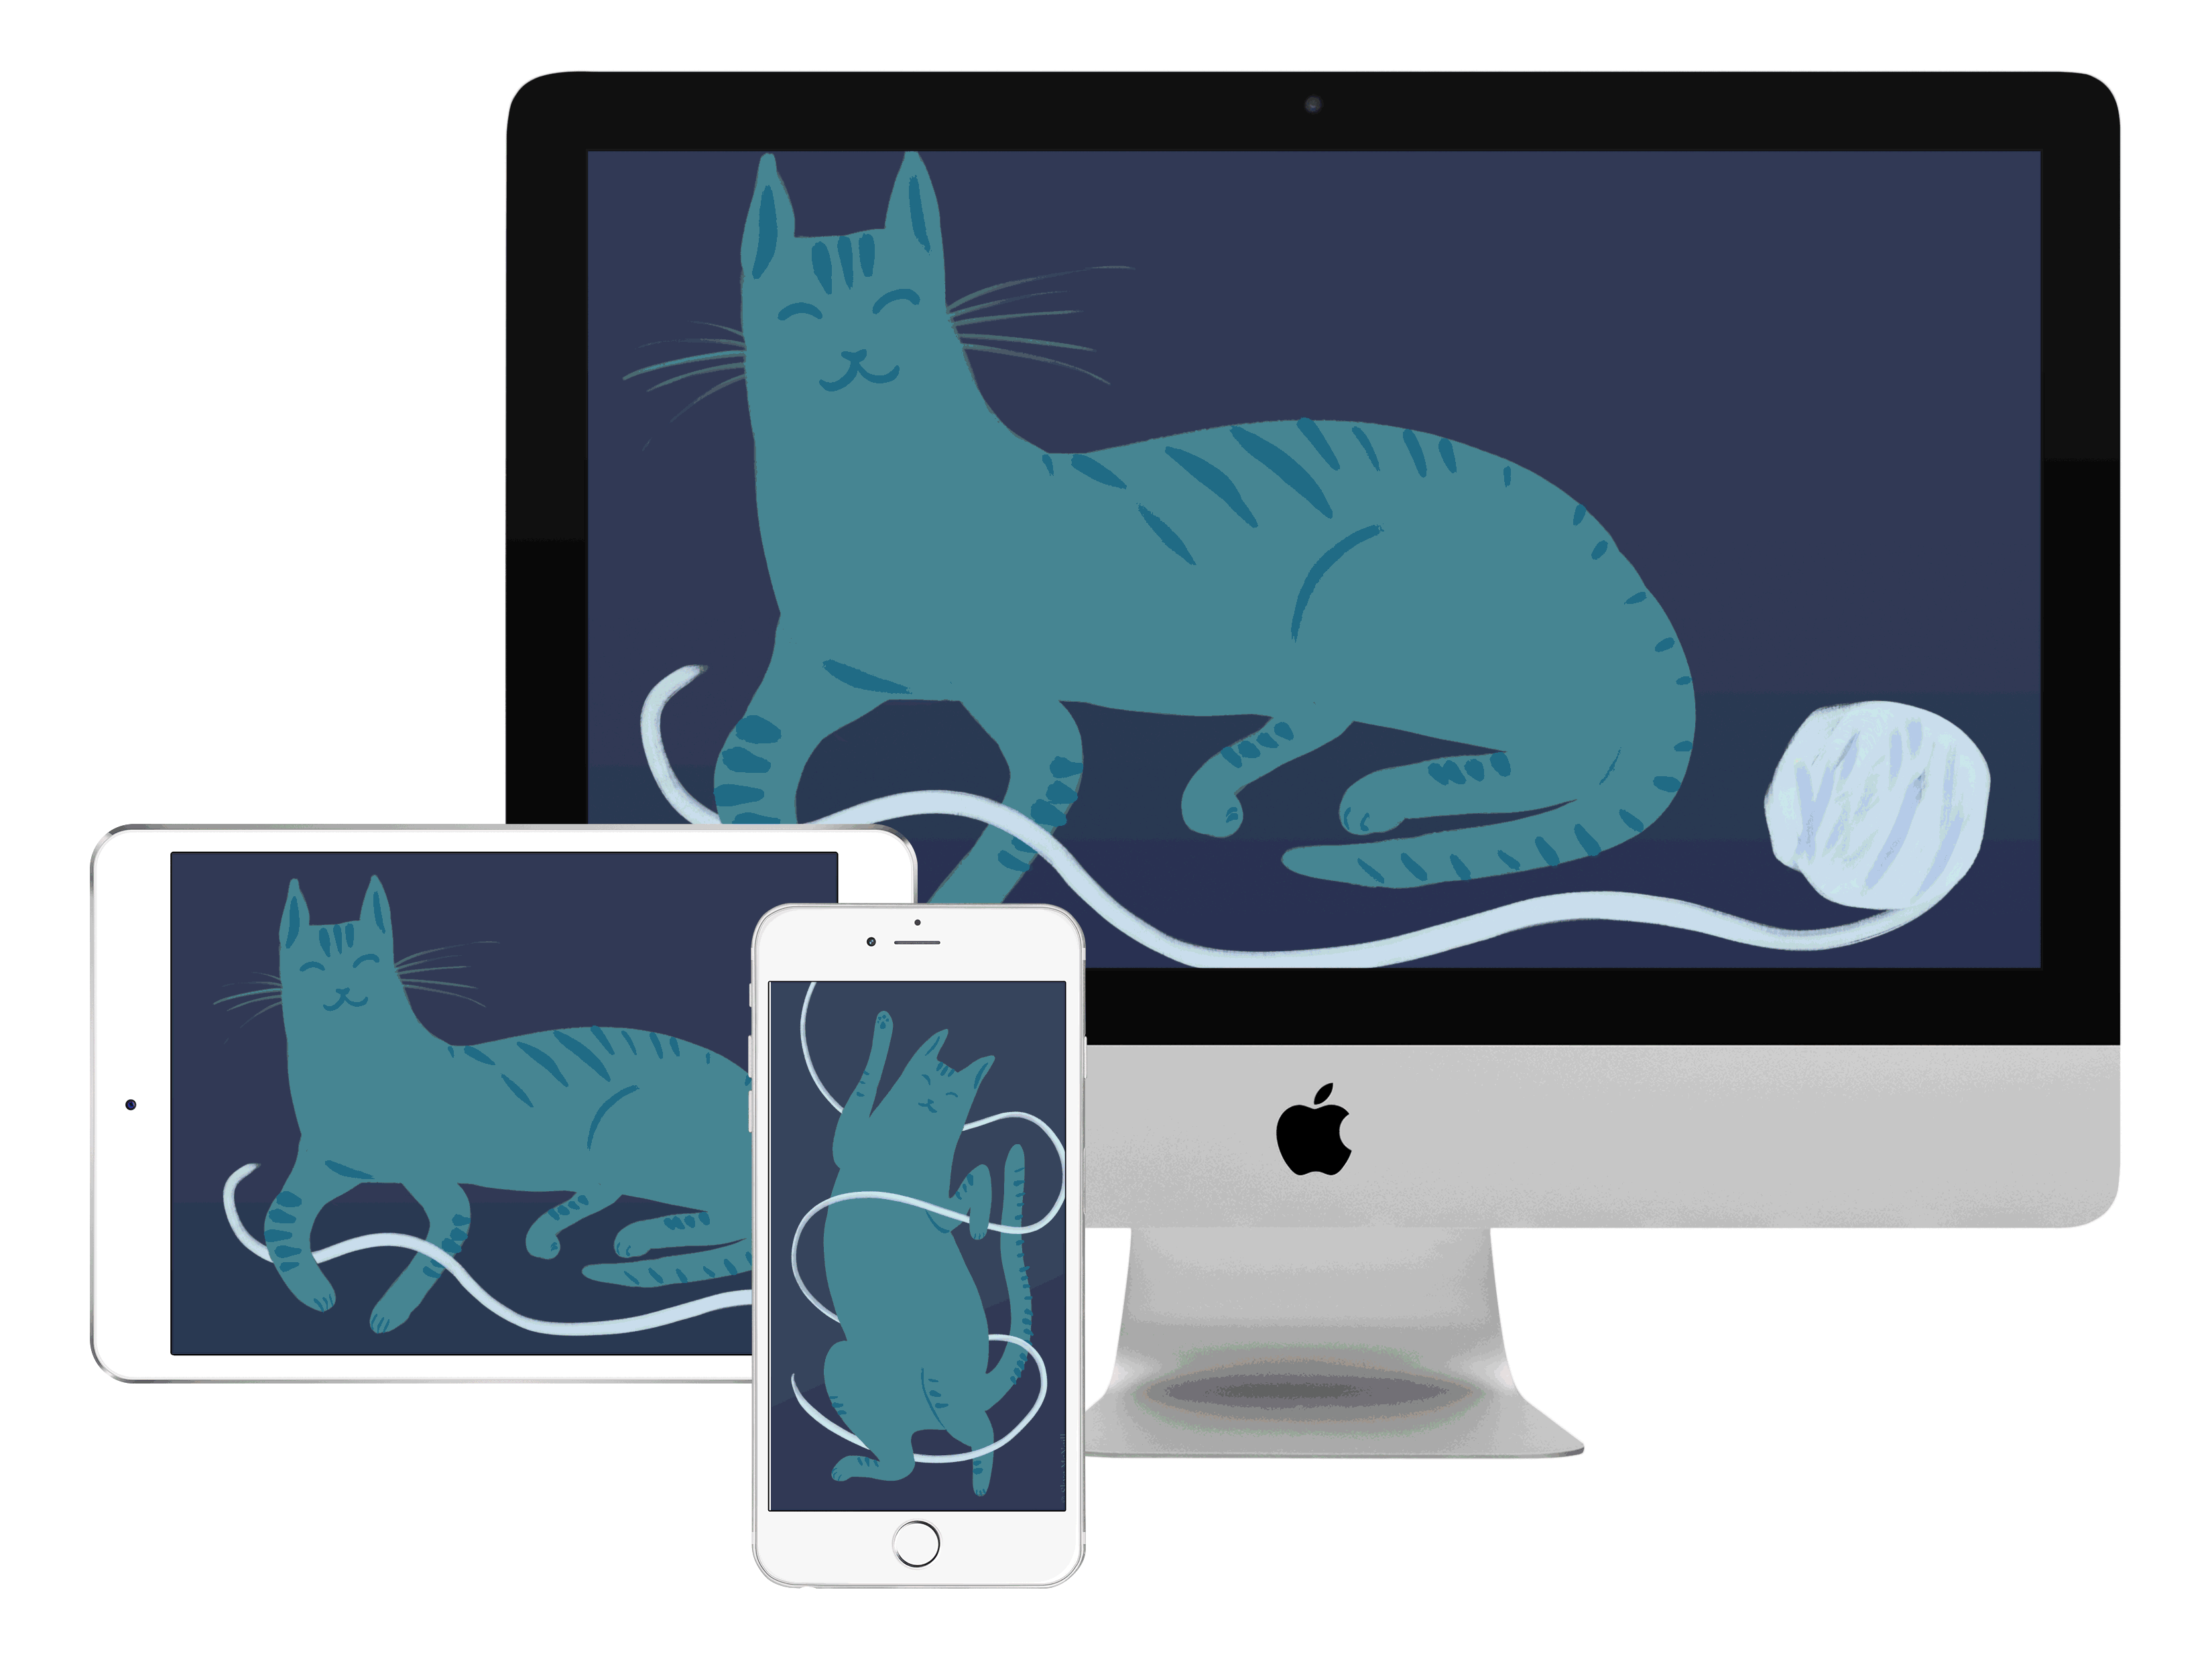 Free artwork! Digital artwork featuring cats and flowers, available for download here.